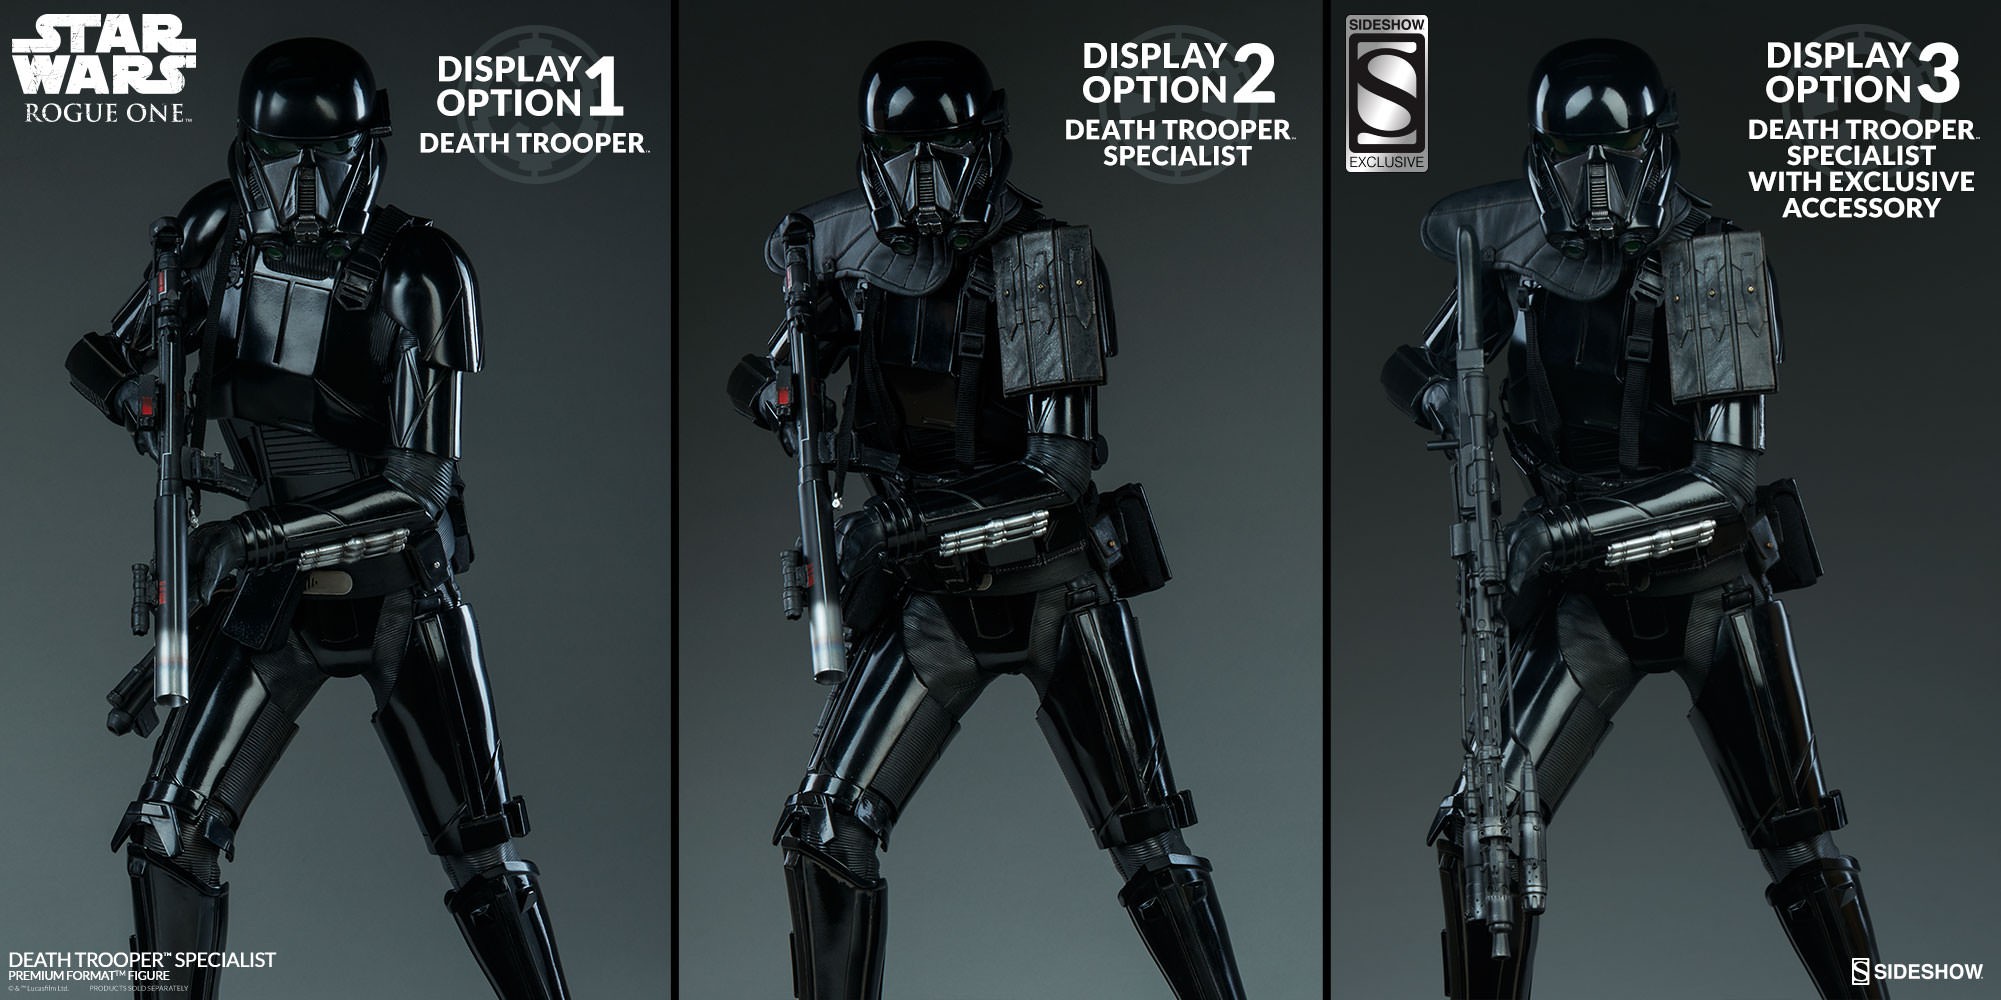 Death Trooper Specialist Exclusive Edition View 3